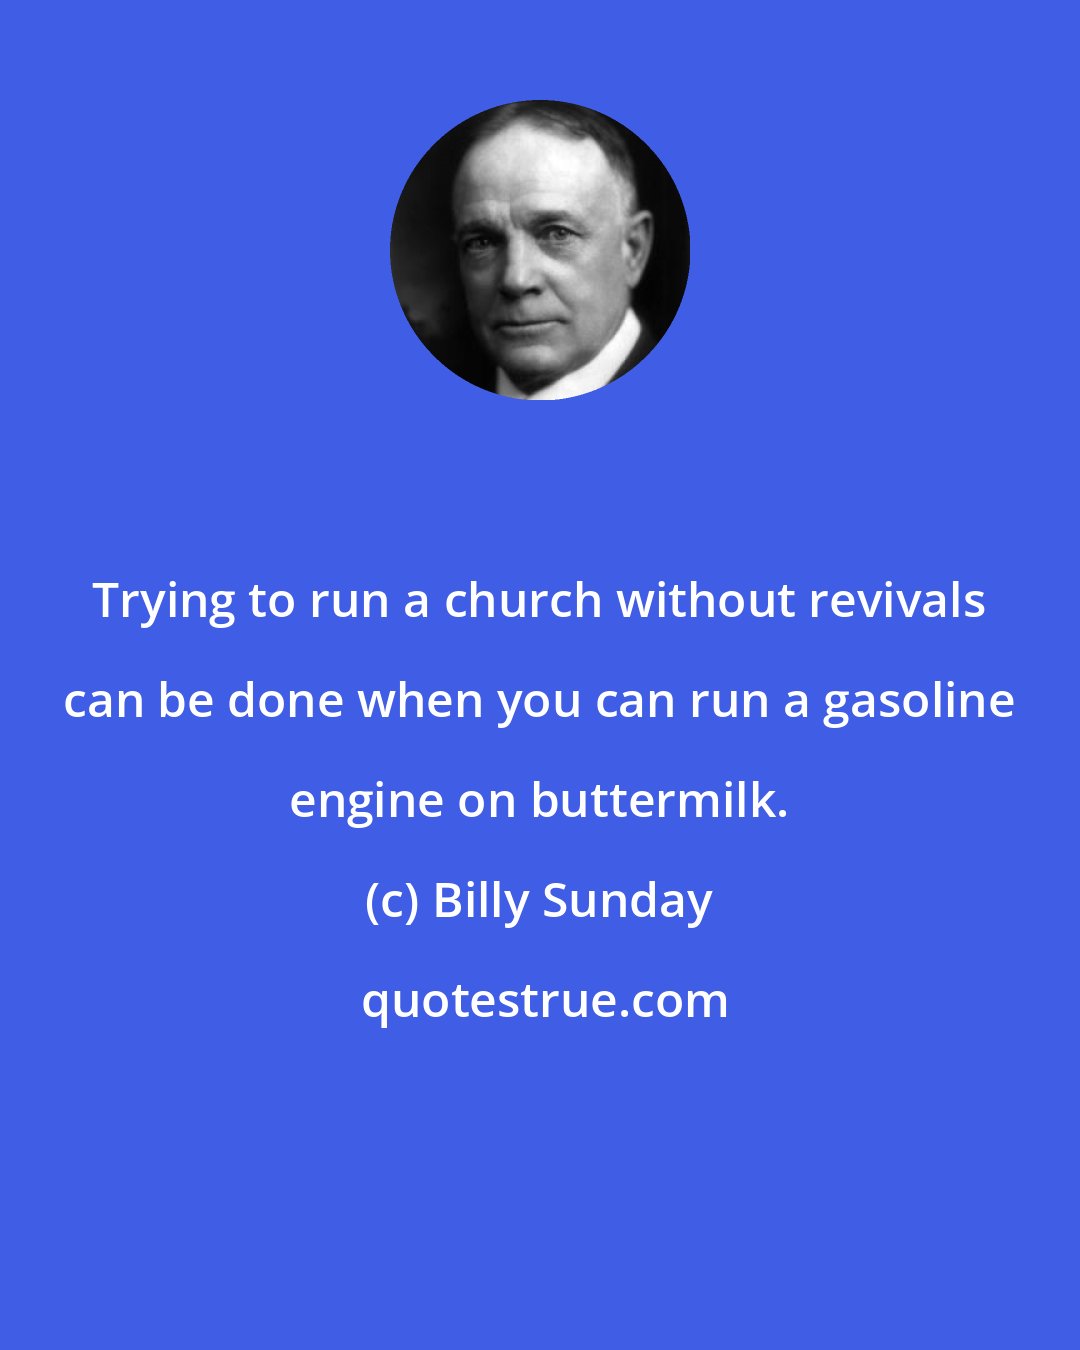 Billy Sunday: Trying to run a church without revivals can be done when you can run a gasoline engine on buttermilk.